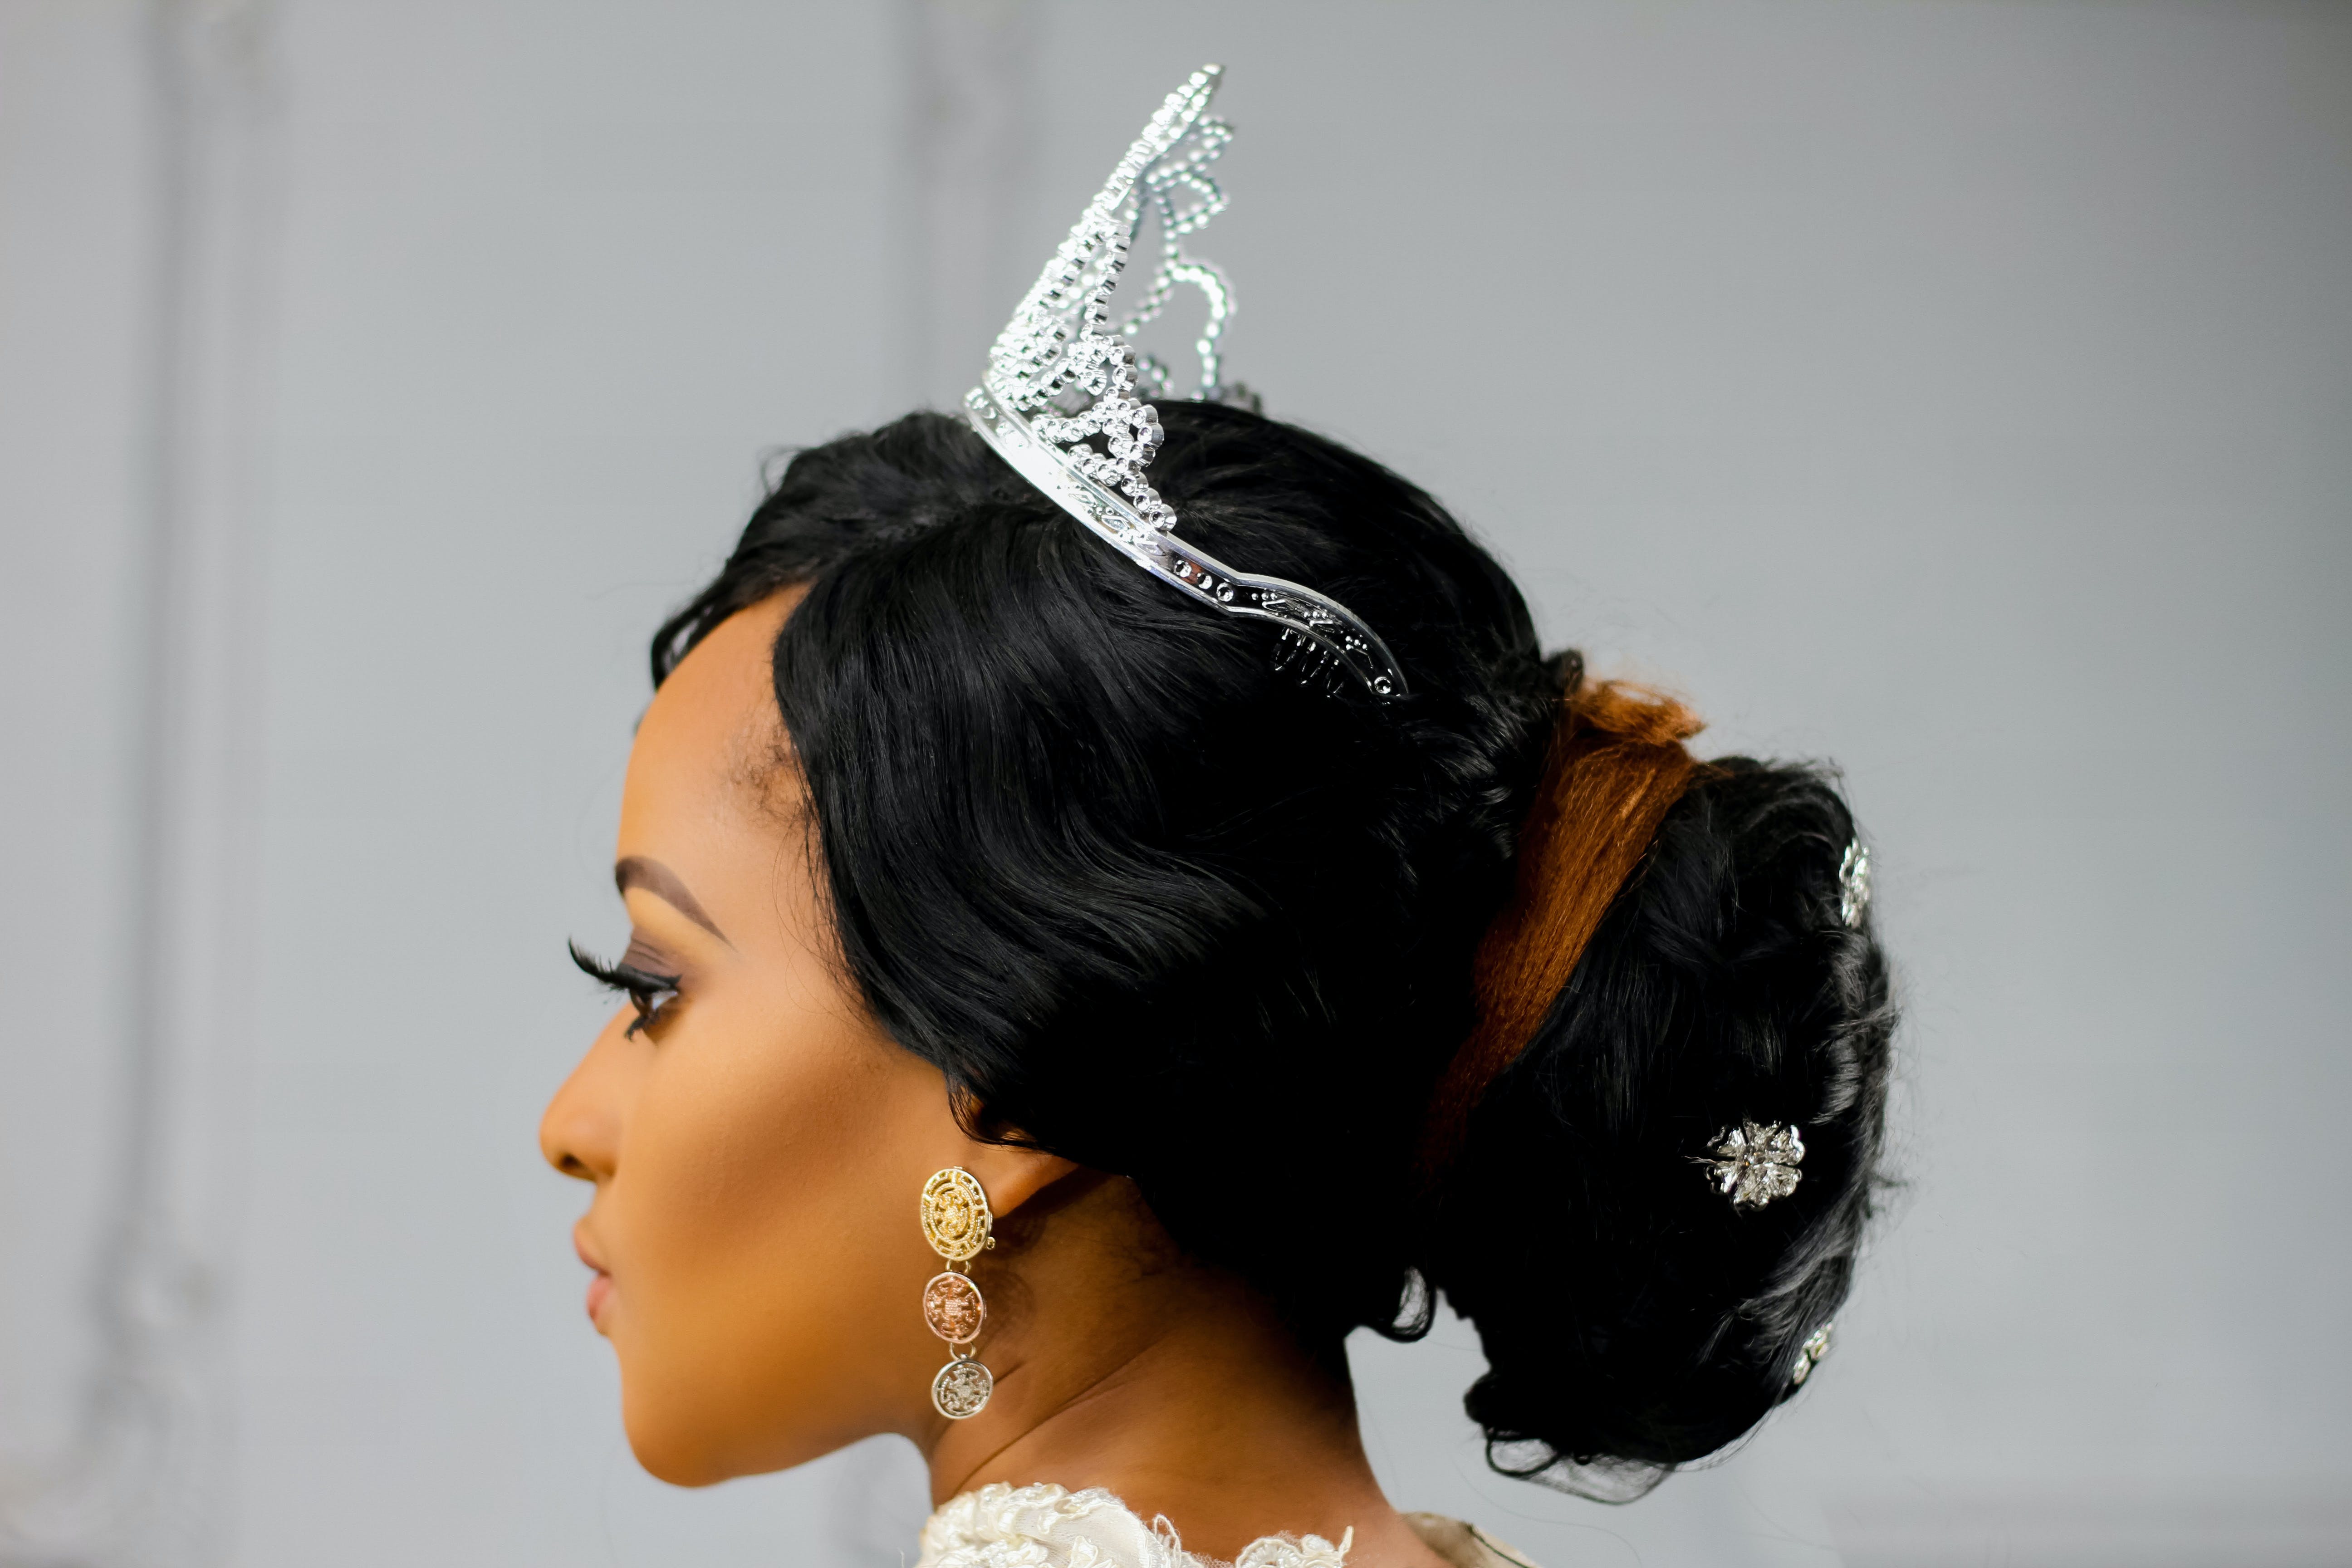 Woman Wearing Silver-colored Crown